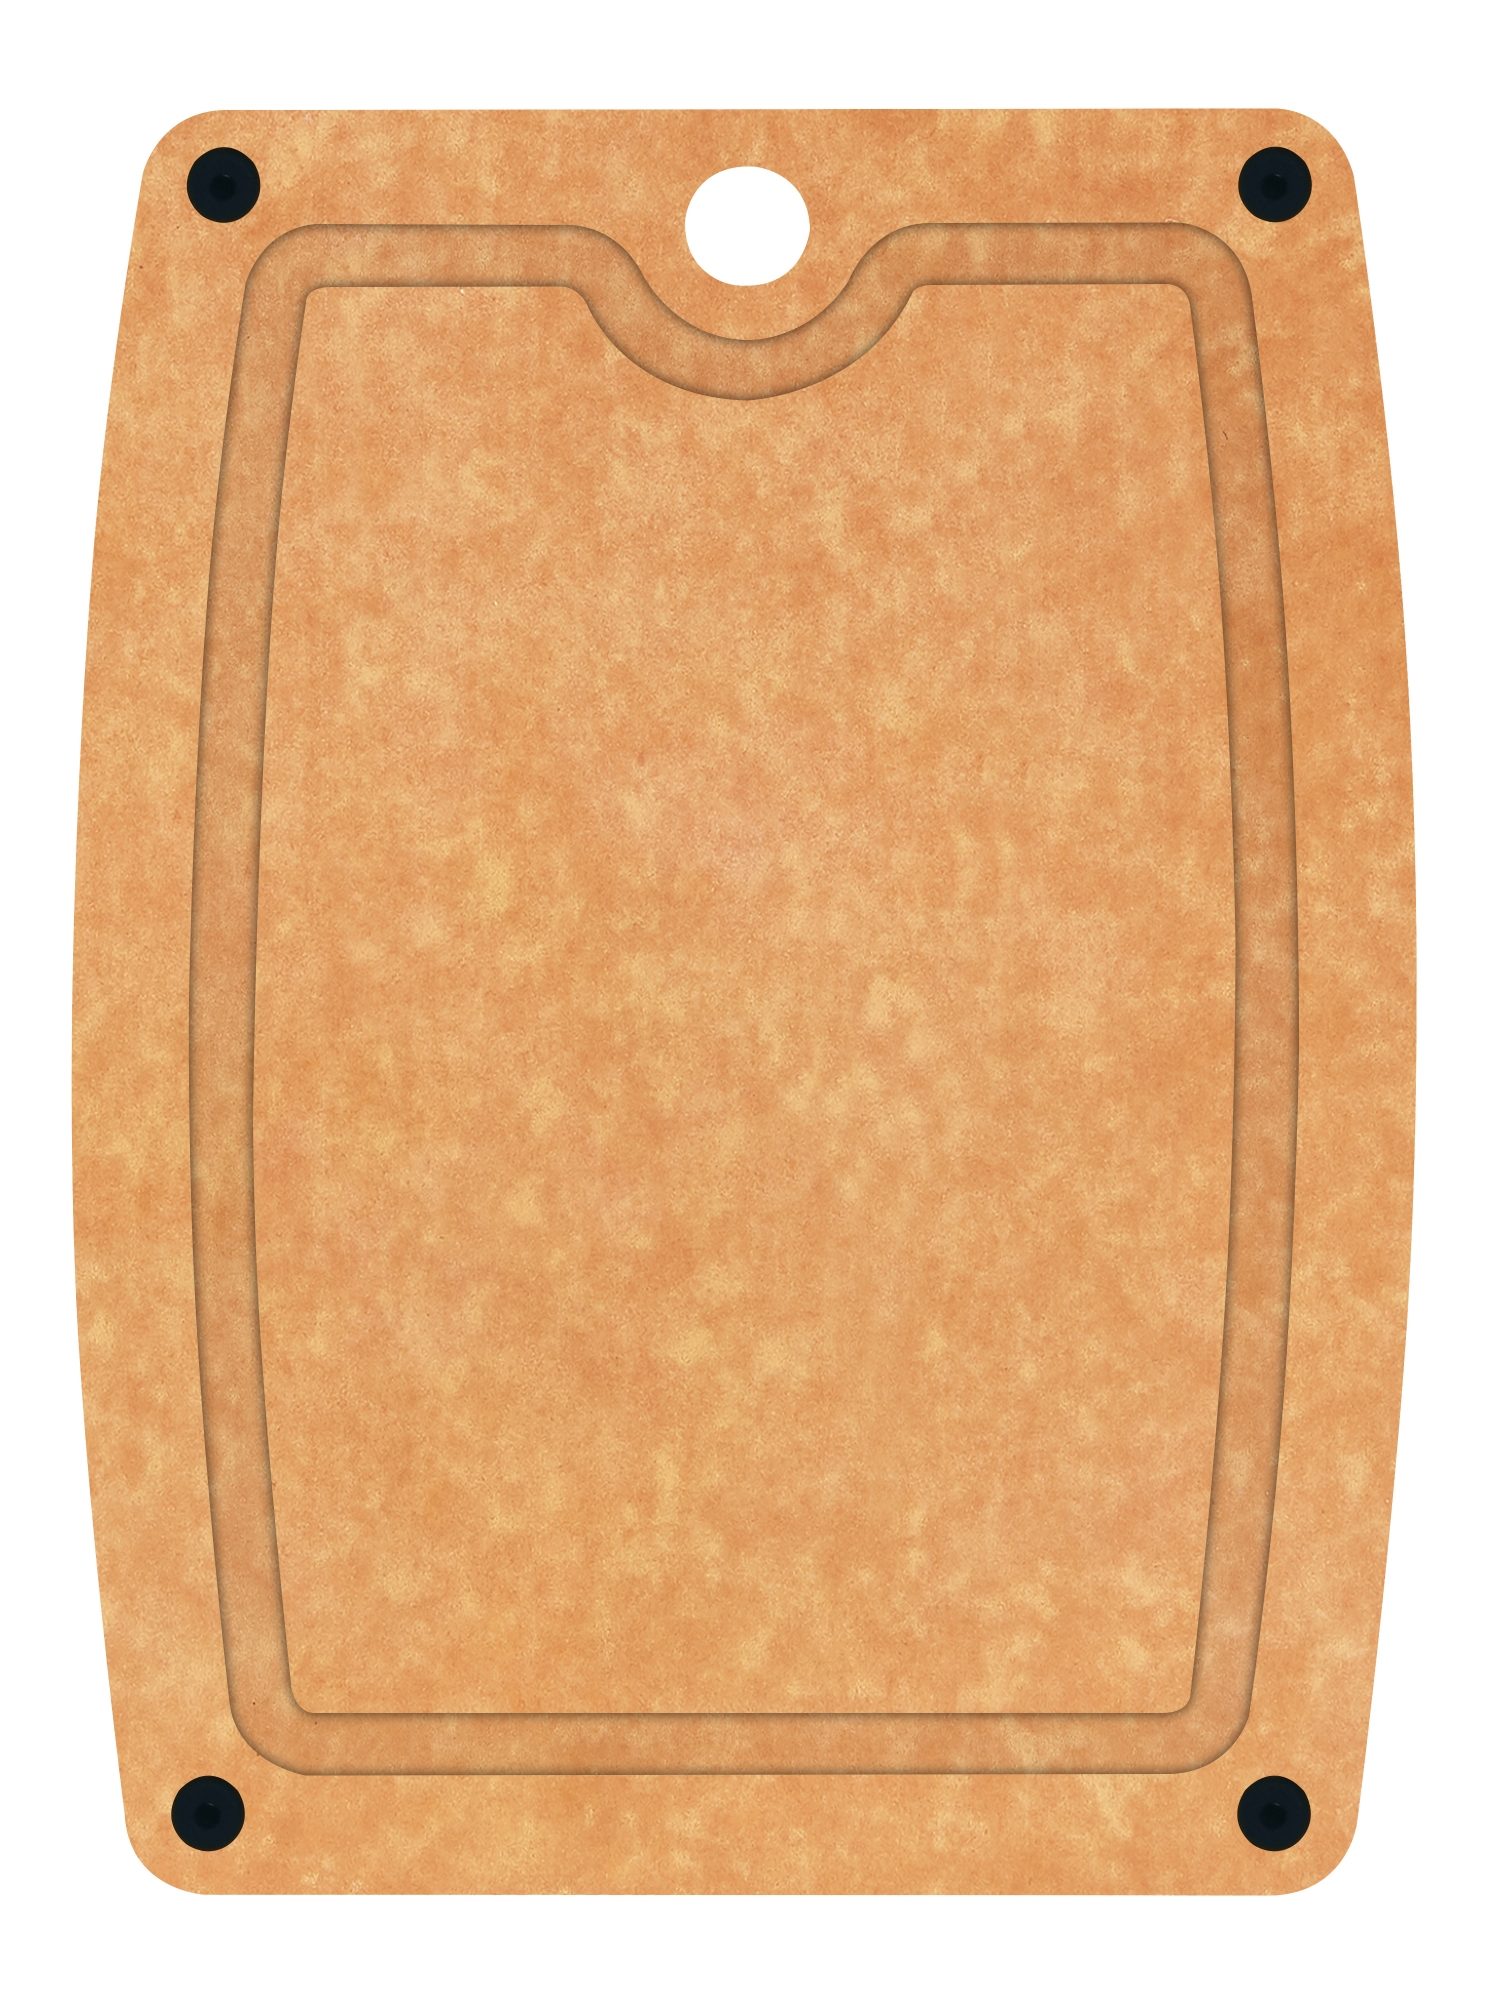 DOUBLE SIDED CHOPPING BOARD WITH FEET NATURAL 245 X 177 X 6MM